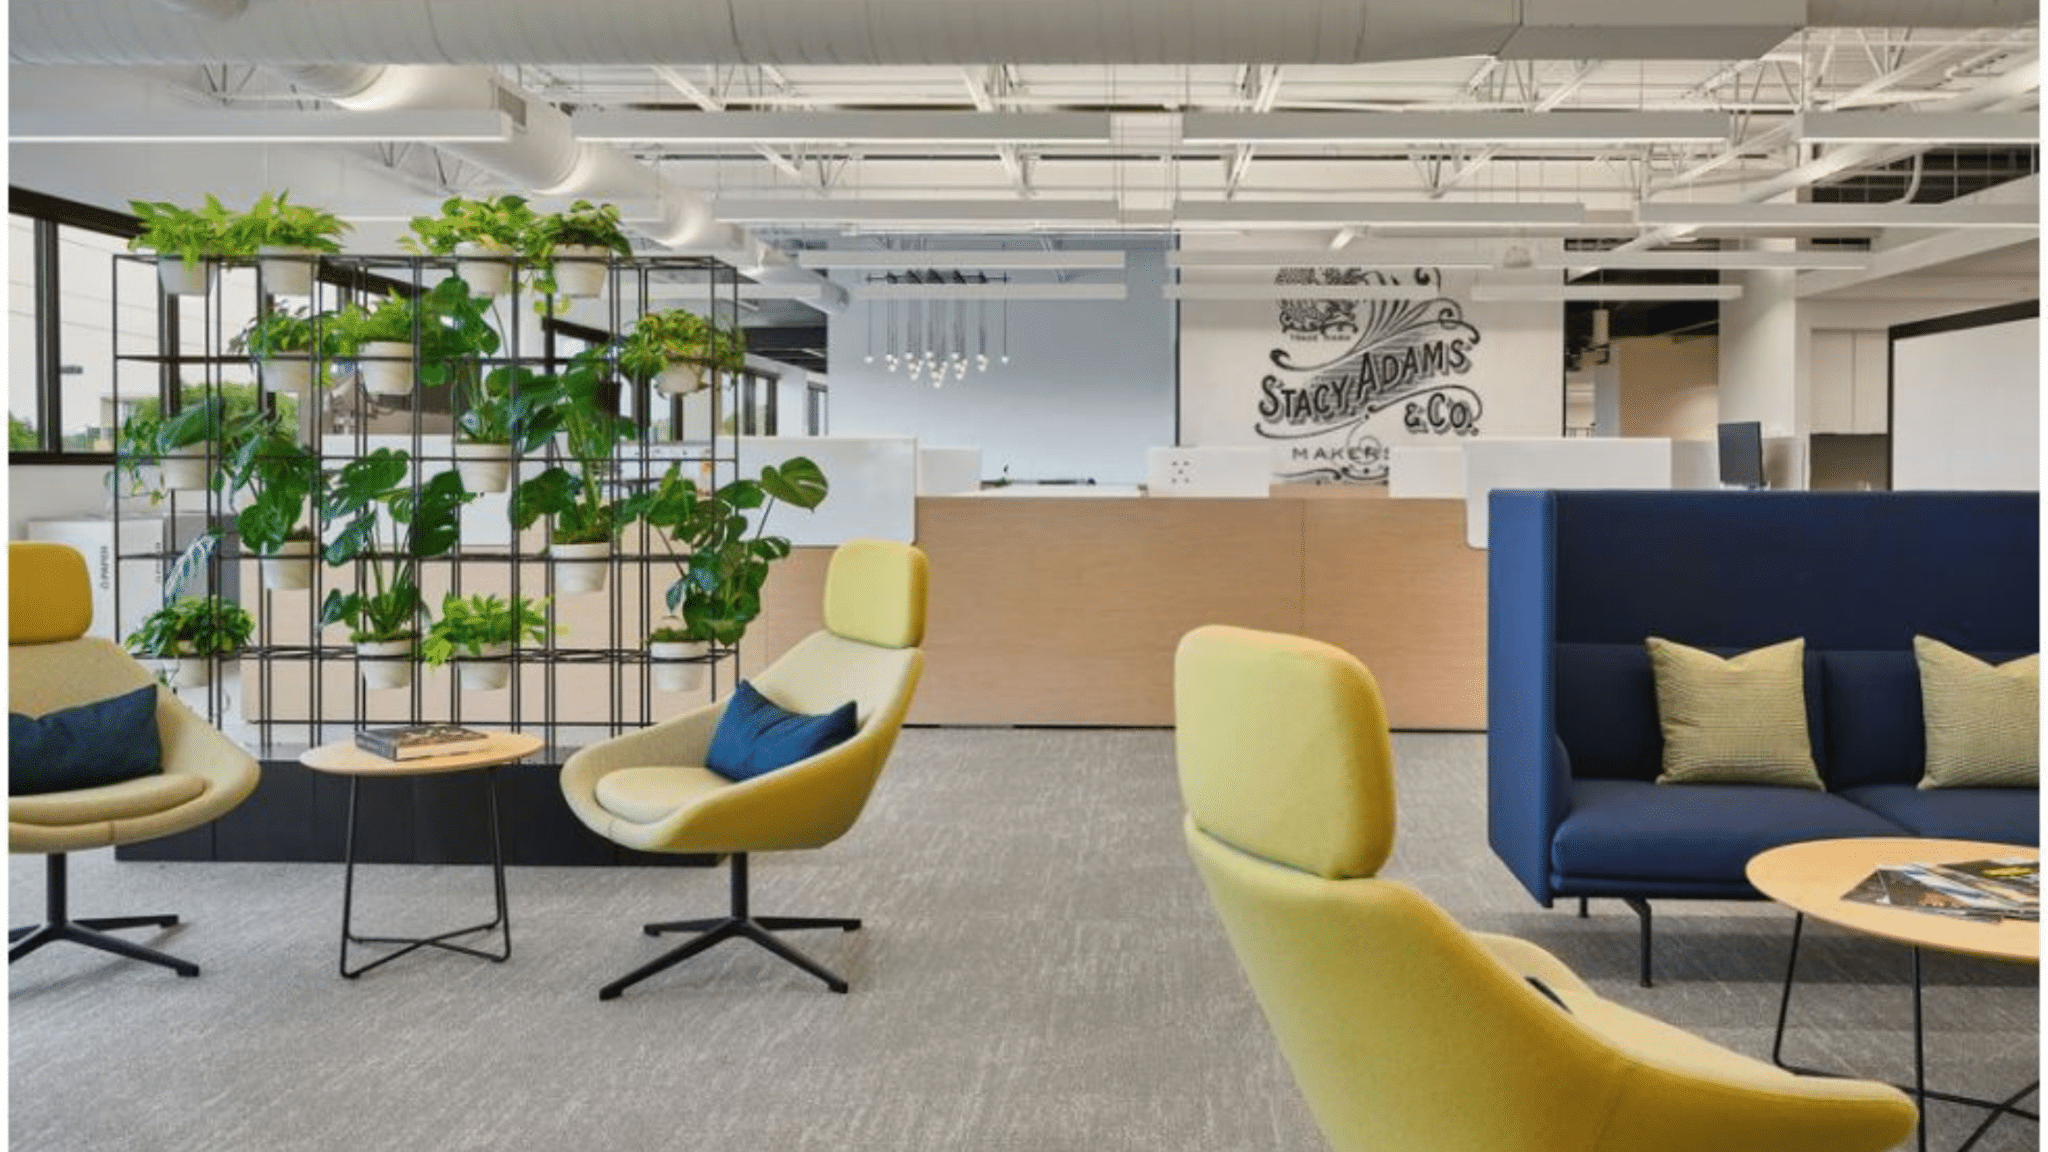 Explore the top 5 office furniture trends for 2024. Pictured are 2: flexible seating and biophilic elements.